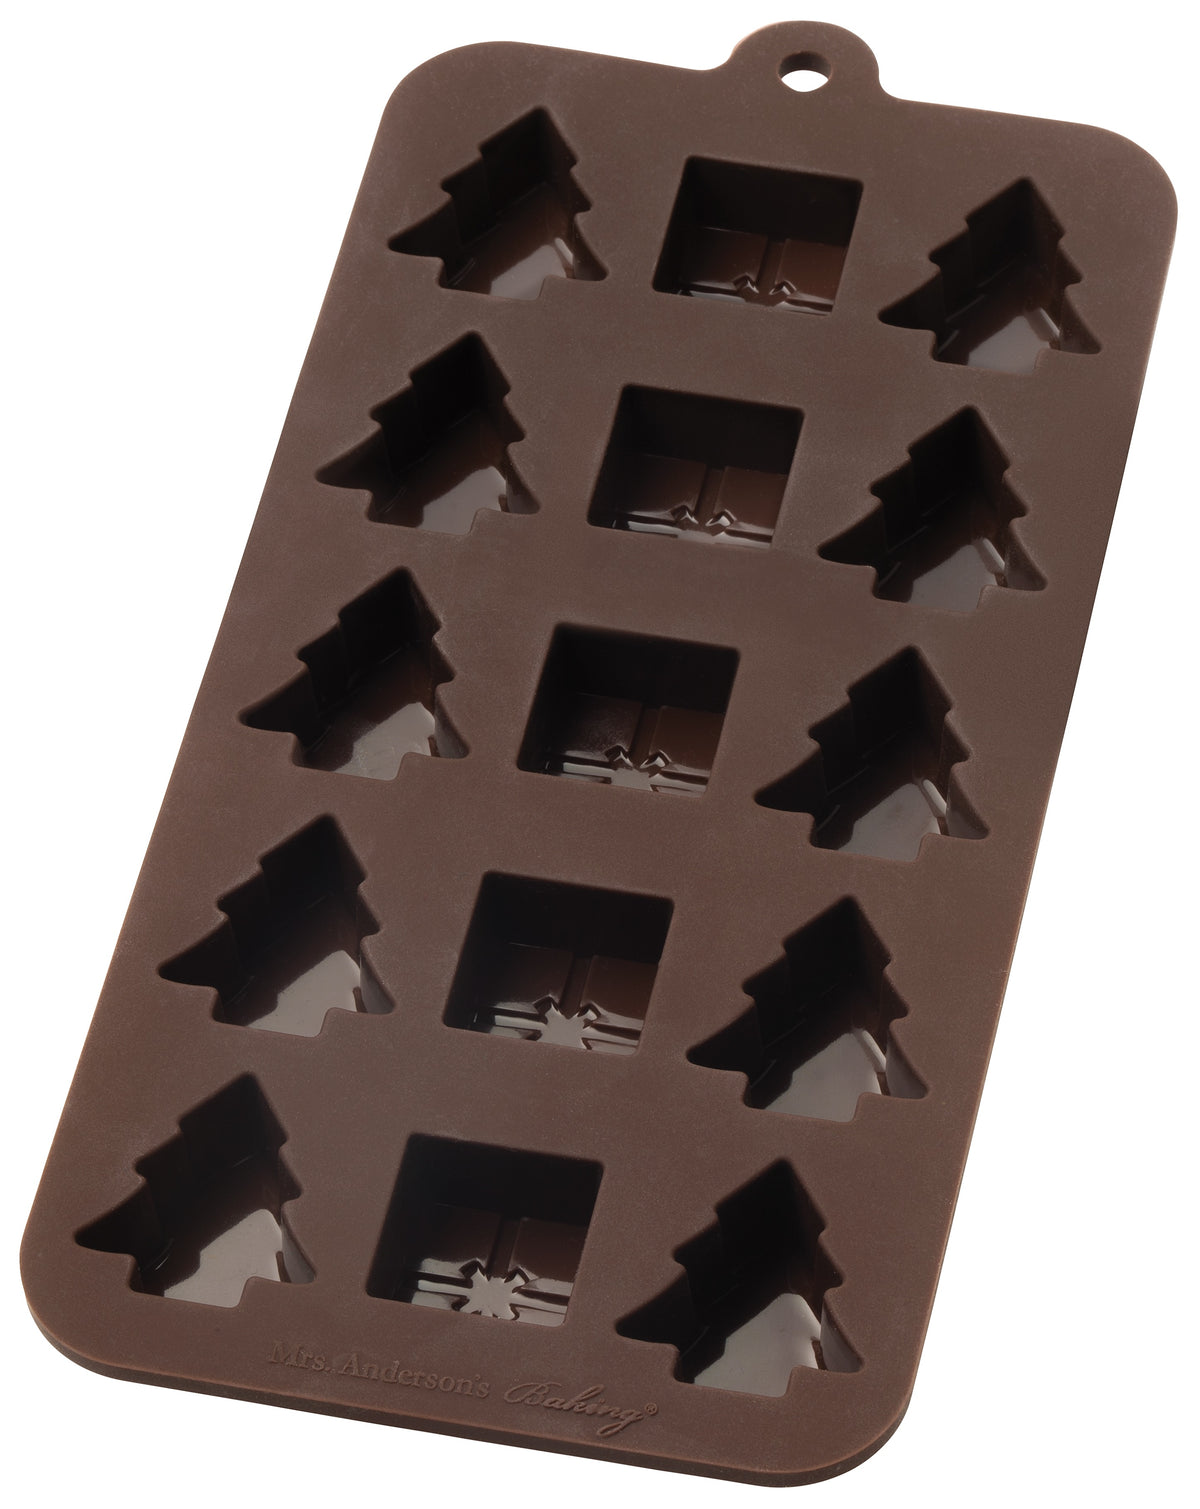 Mrs. Anderson's 43765 Baking Hoilday Chocolate Mold, Brown